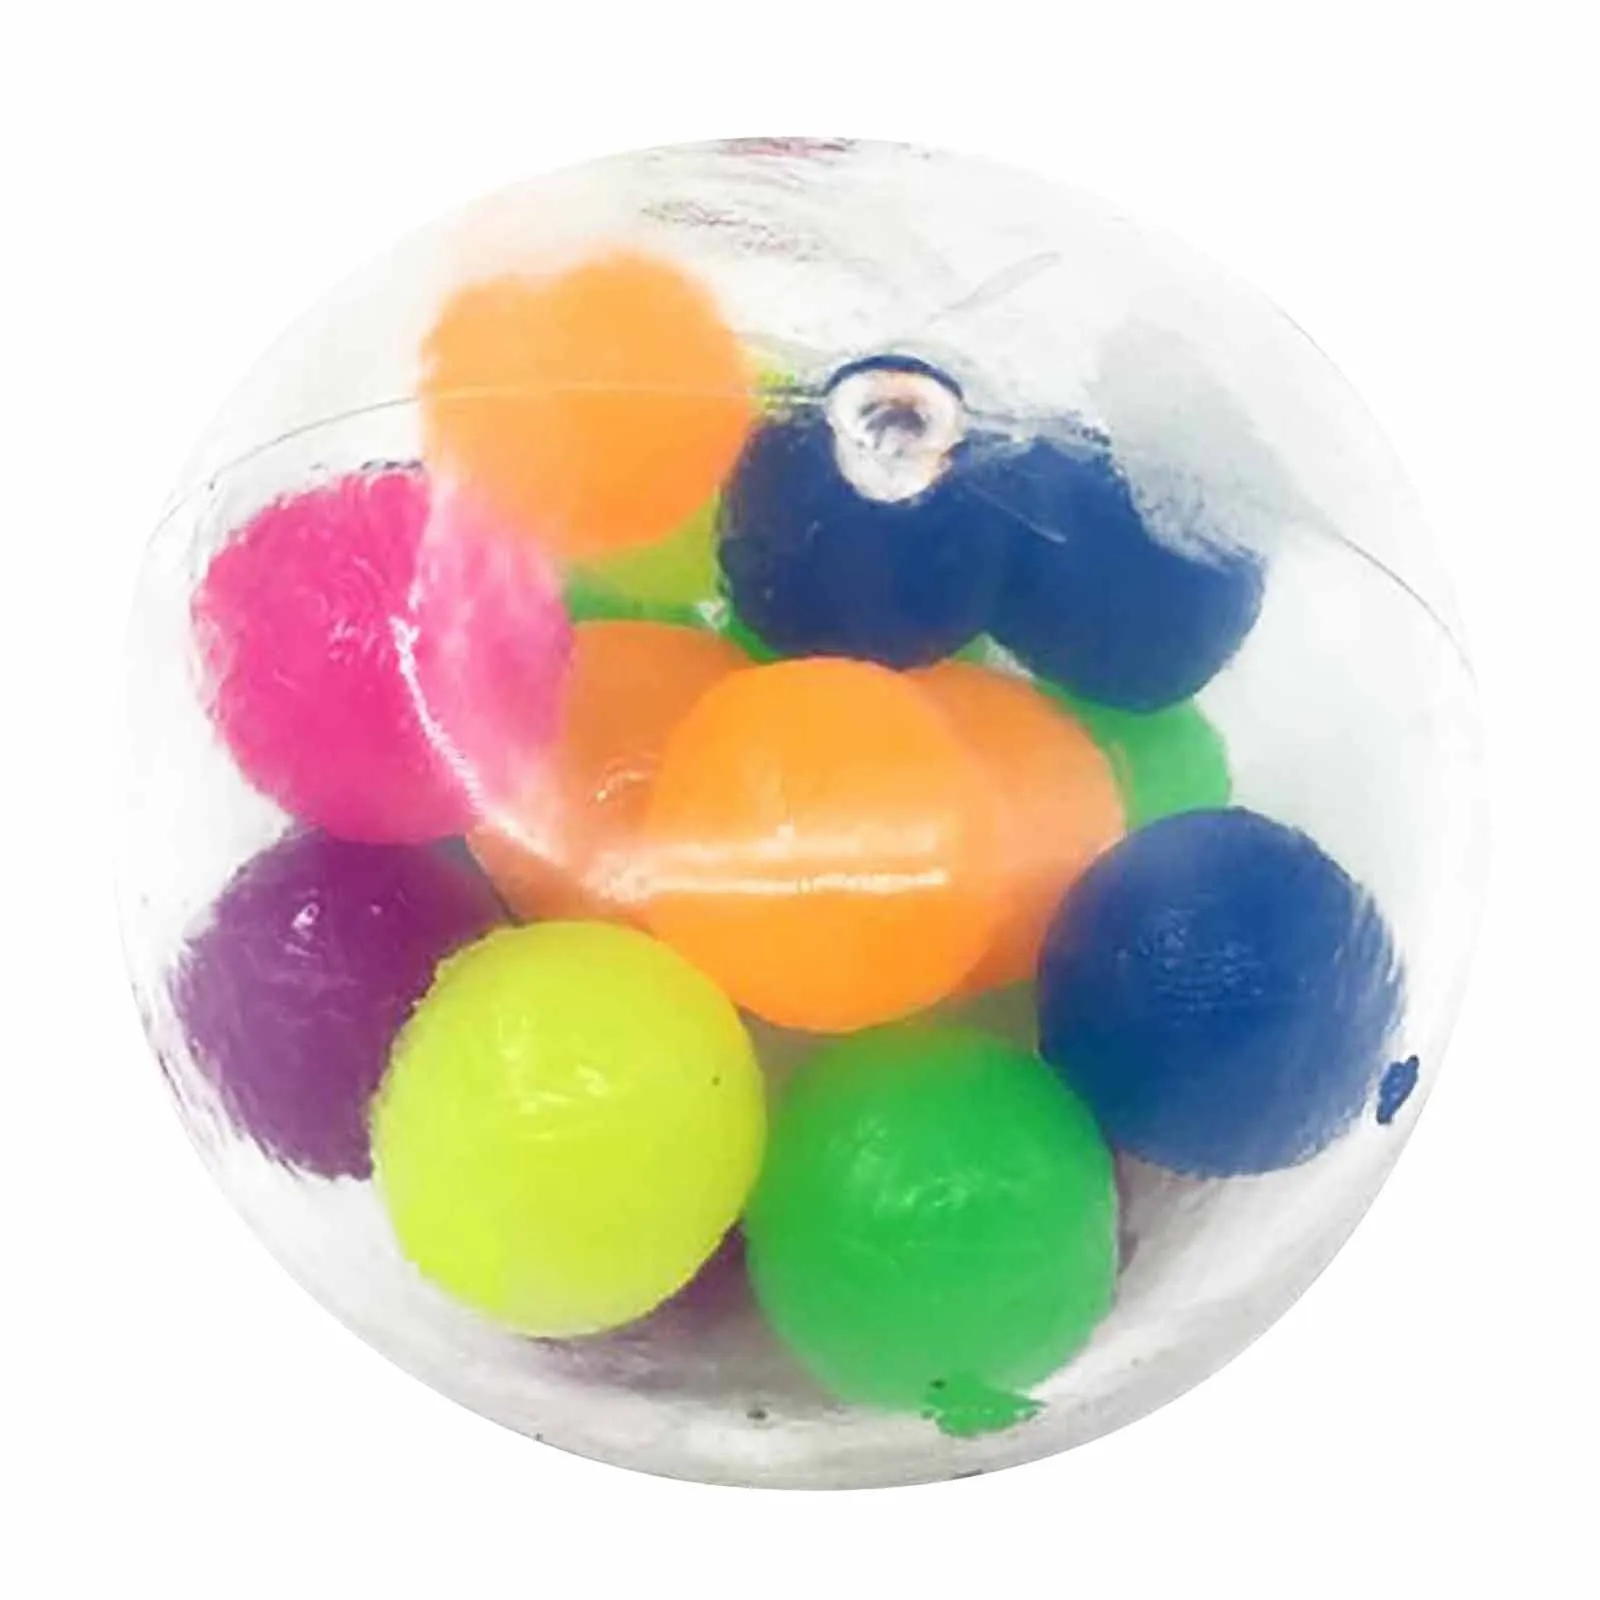 Color Sensory Toy Office Stress Ball Pressure Ball Stress Reliever Toy2MldeCompression Fidget Toy Stress Relief Gift DHL BS204896028